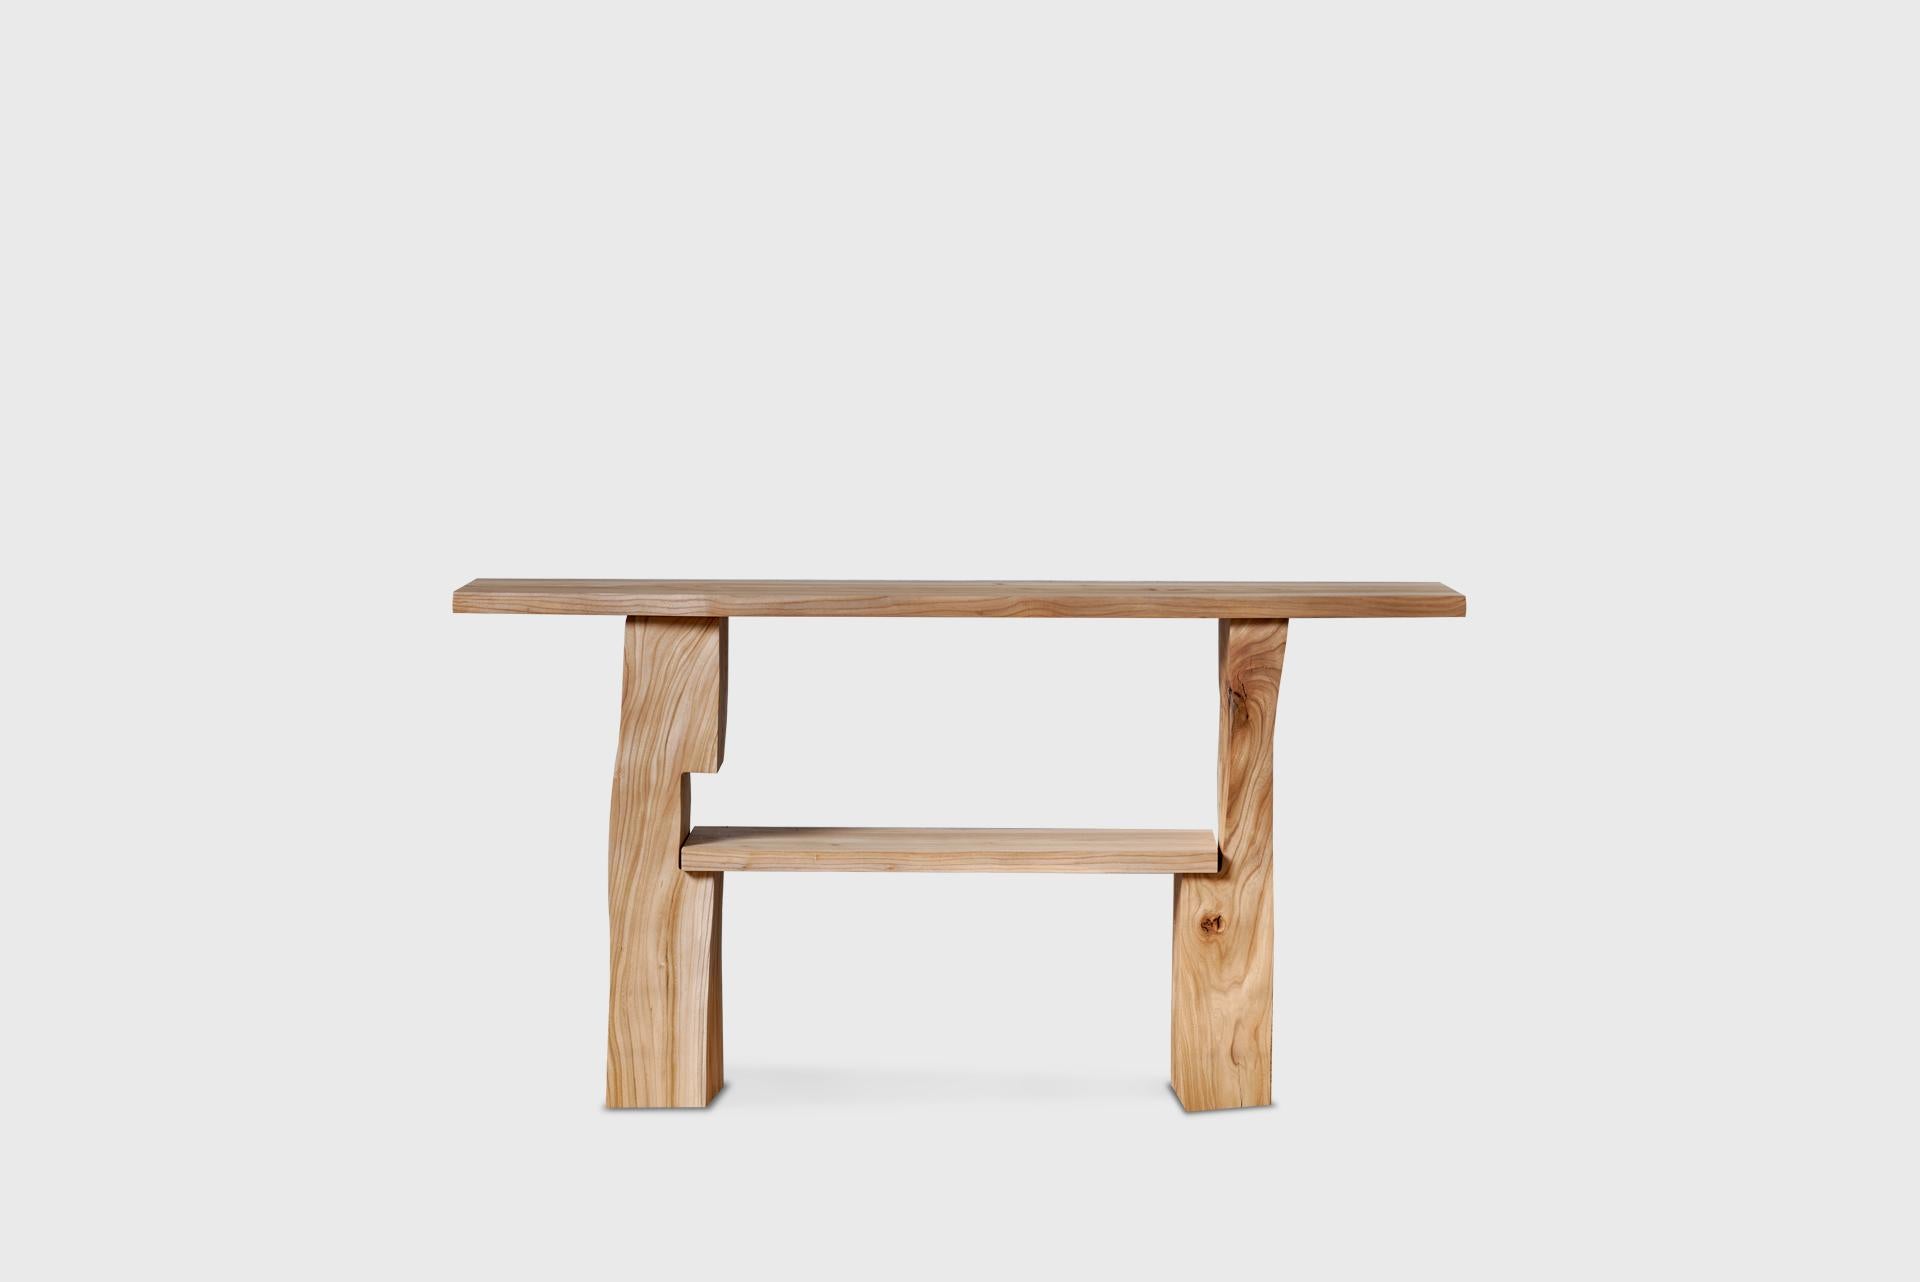 Dutch Contemporary Sideboard Table, in Modern Natural Plain Elm Wood, by Jonas Lutz For Sale